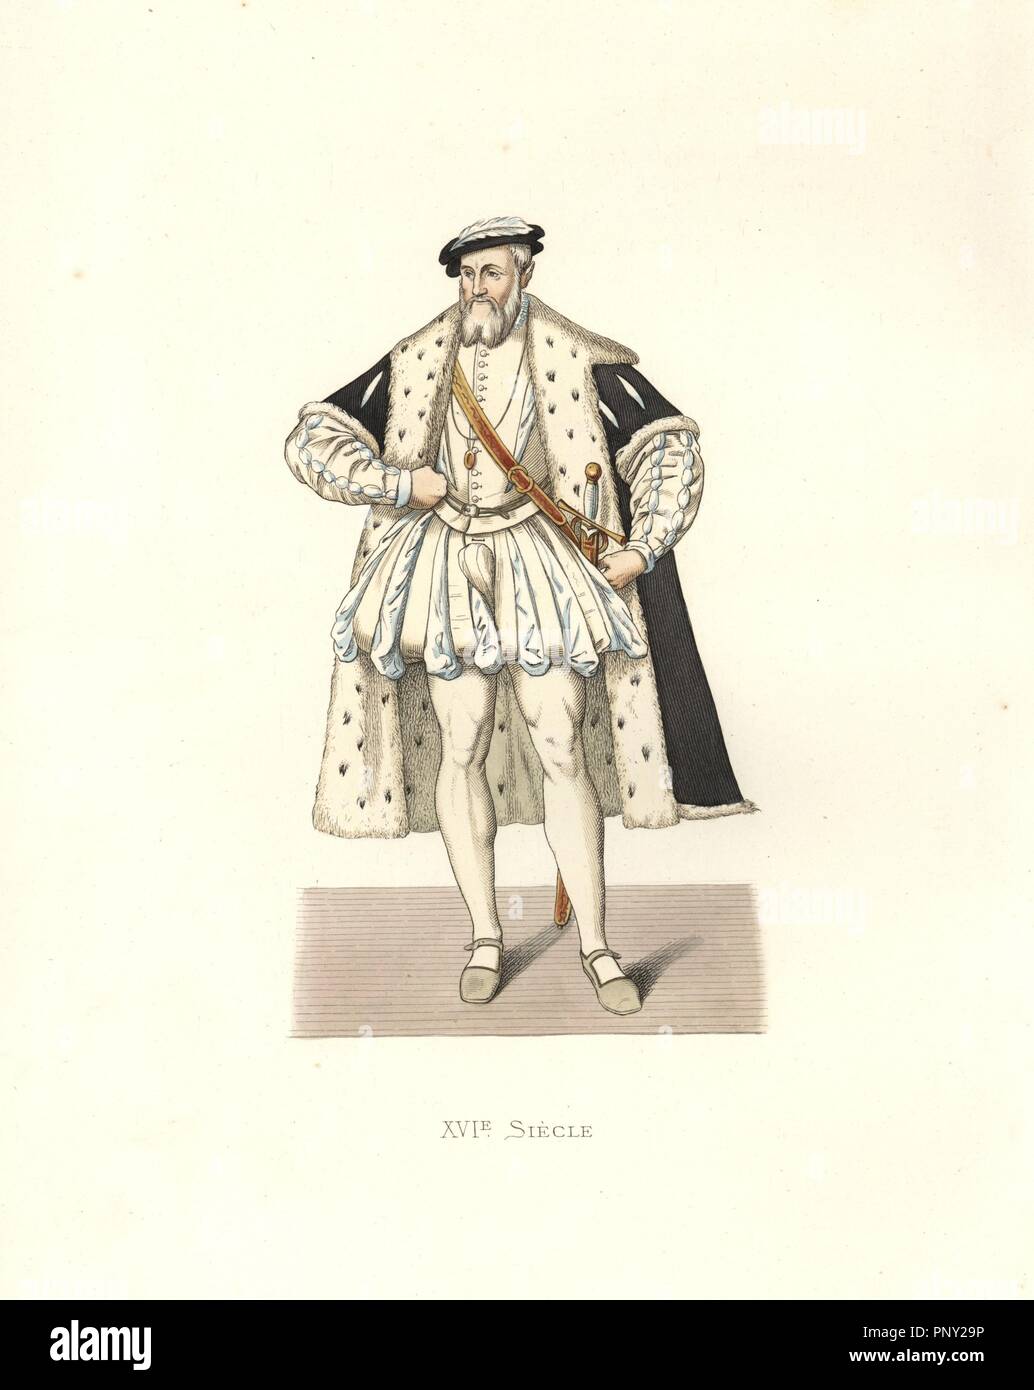 Francois de Lorraine, Duke of Guise (1519-1563) in court wear. A brown cape lined with ermine, cream doublet slashed to reveal white fabric beneath, sword slung from shoulder, and a protruding codpiece. . . Handcolored illustration by E. Lechevallier-Chevignard, lithographed by A. Didier, L. Flameng, F. Laguillermie, from Georges Duplessis's 'Costumes historiques des XVIe, XVIIe et XVIIIe siecles' (Historical costumes of the 16th, 17th and 18th centuries), Paris 1867. The book was a continuation of the series on the costumes of the 12th to 15th centuries published by Camille Bonnard and Paul M Stock Photo